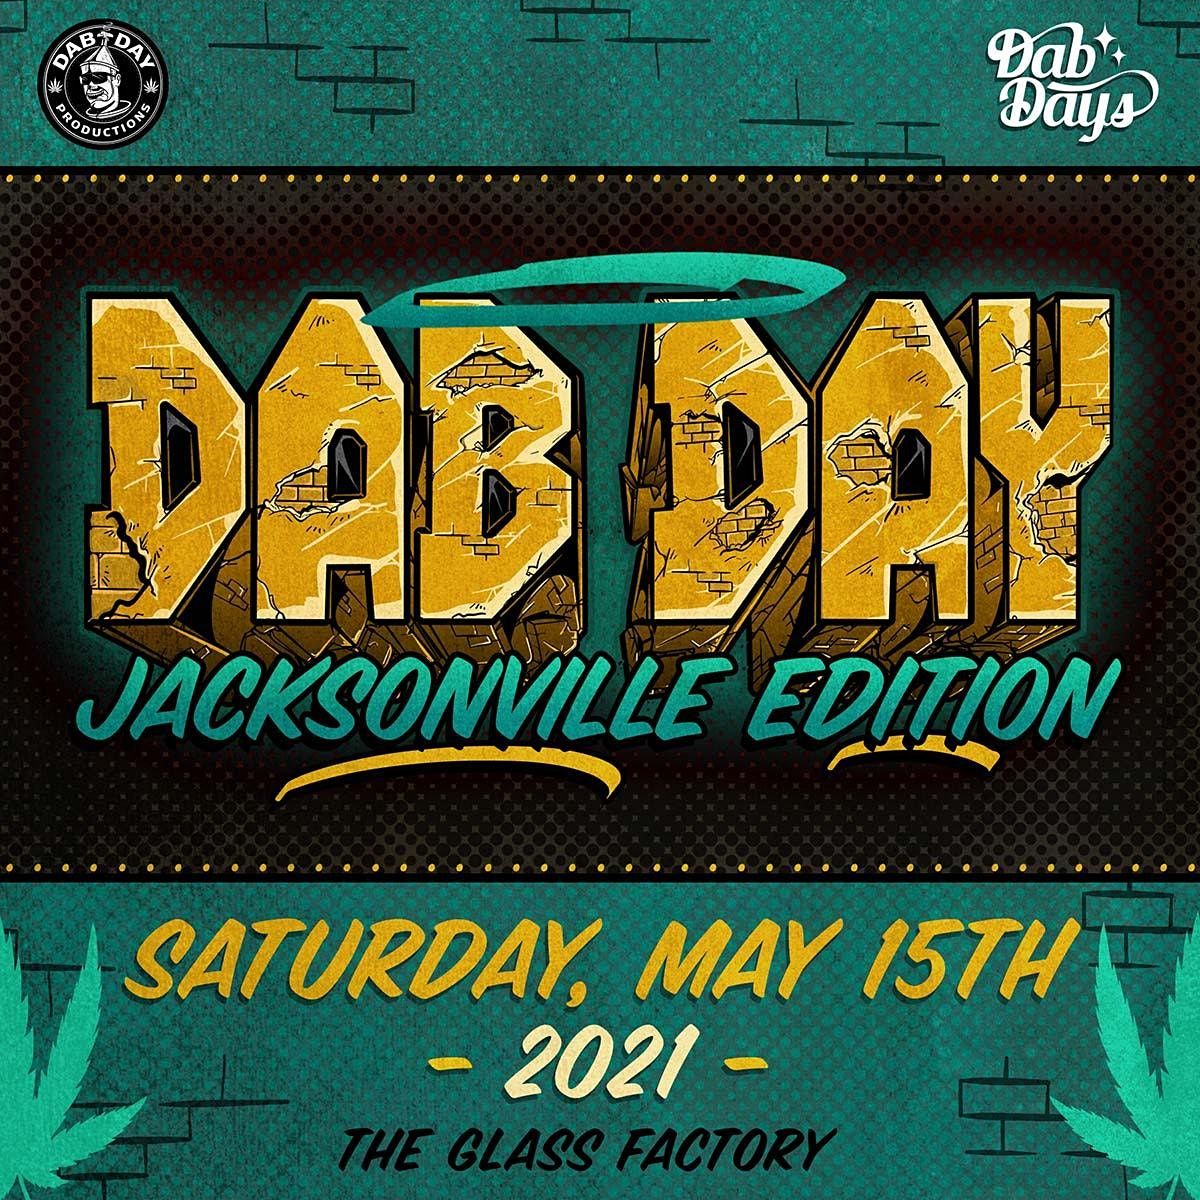 DAB DAY Jacksonville Edition Presented by One Plant, The Glass Factory